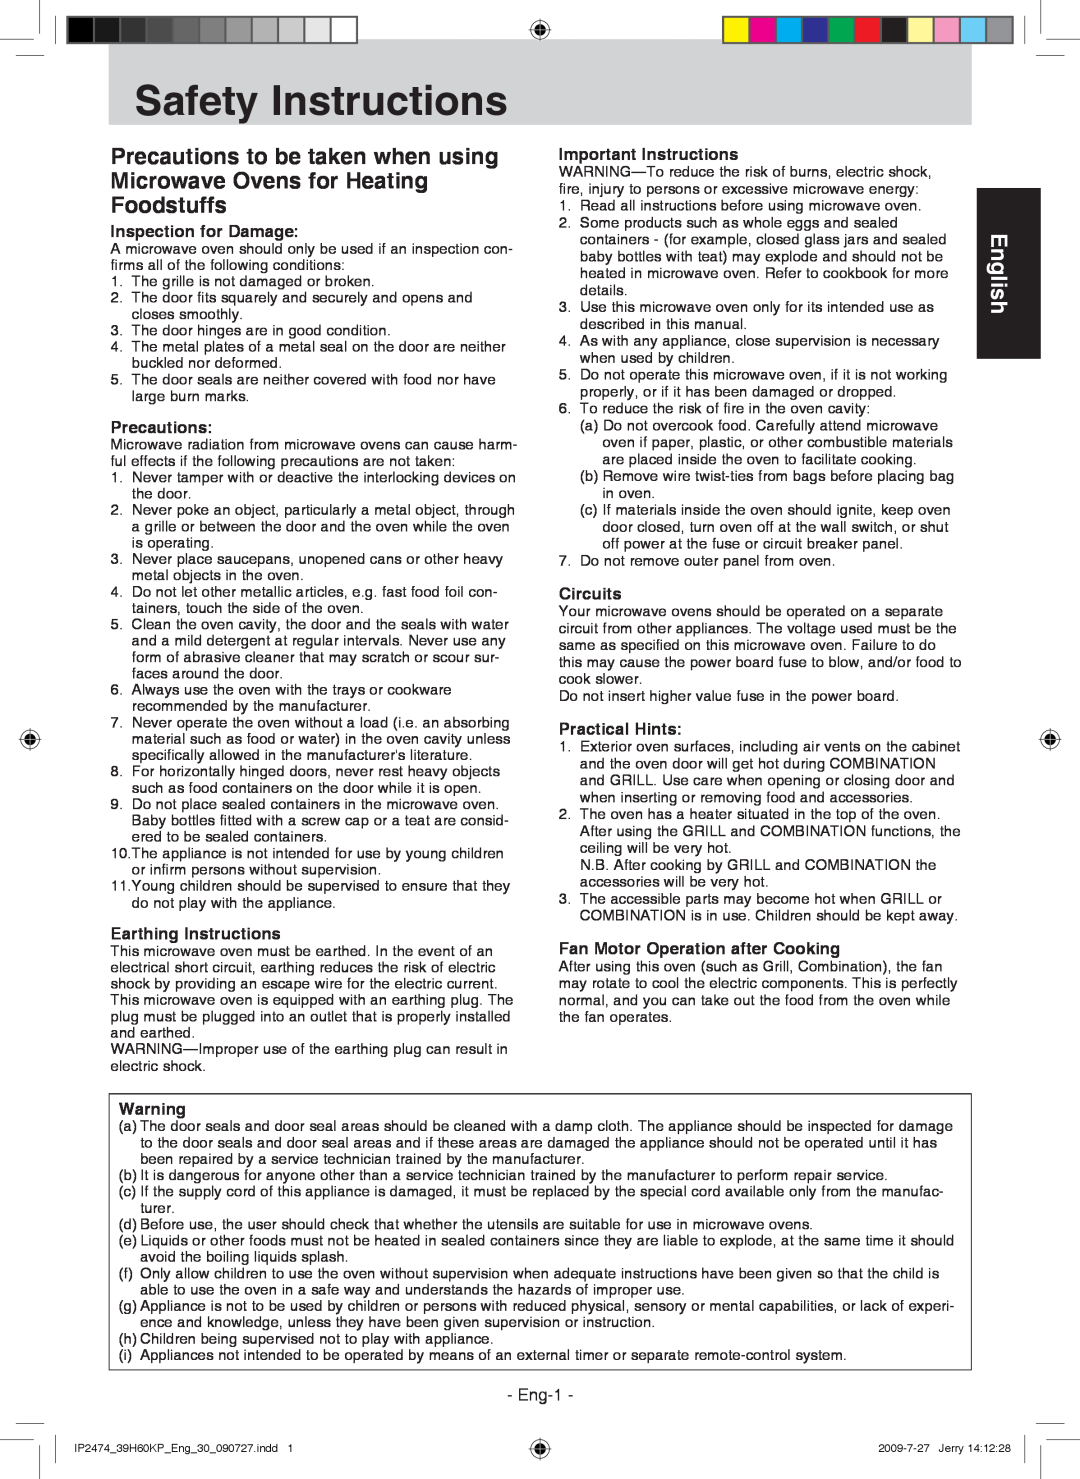 Panasonic NN-GD579S Safety Instructions, English, Inspection for Damage, Precautions, Earthing Instructions, Circuits 